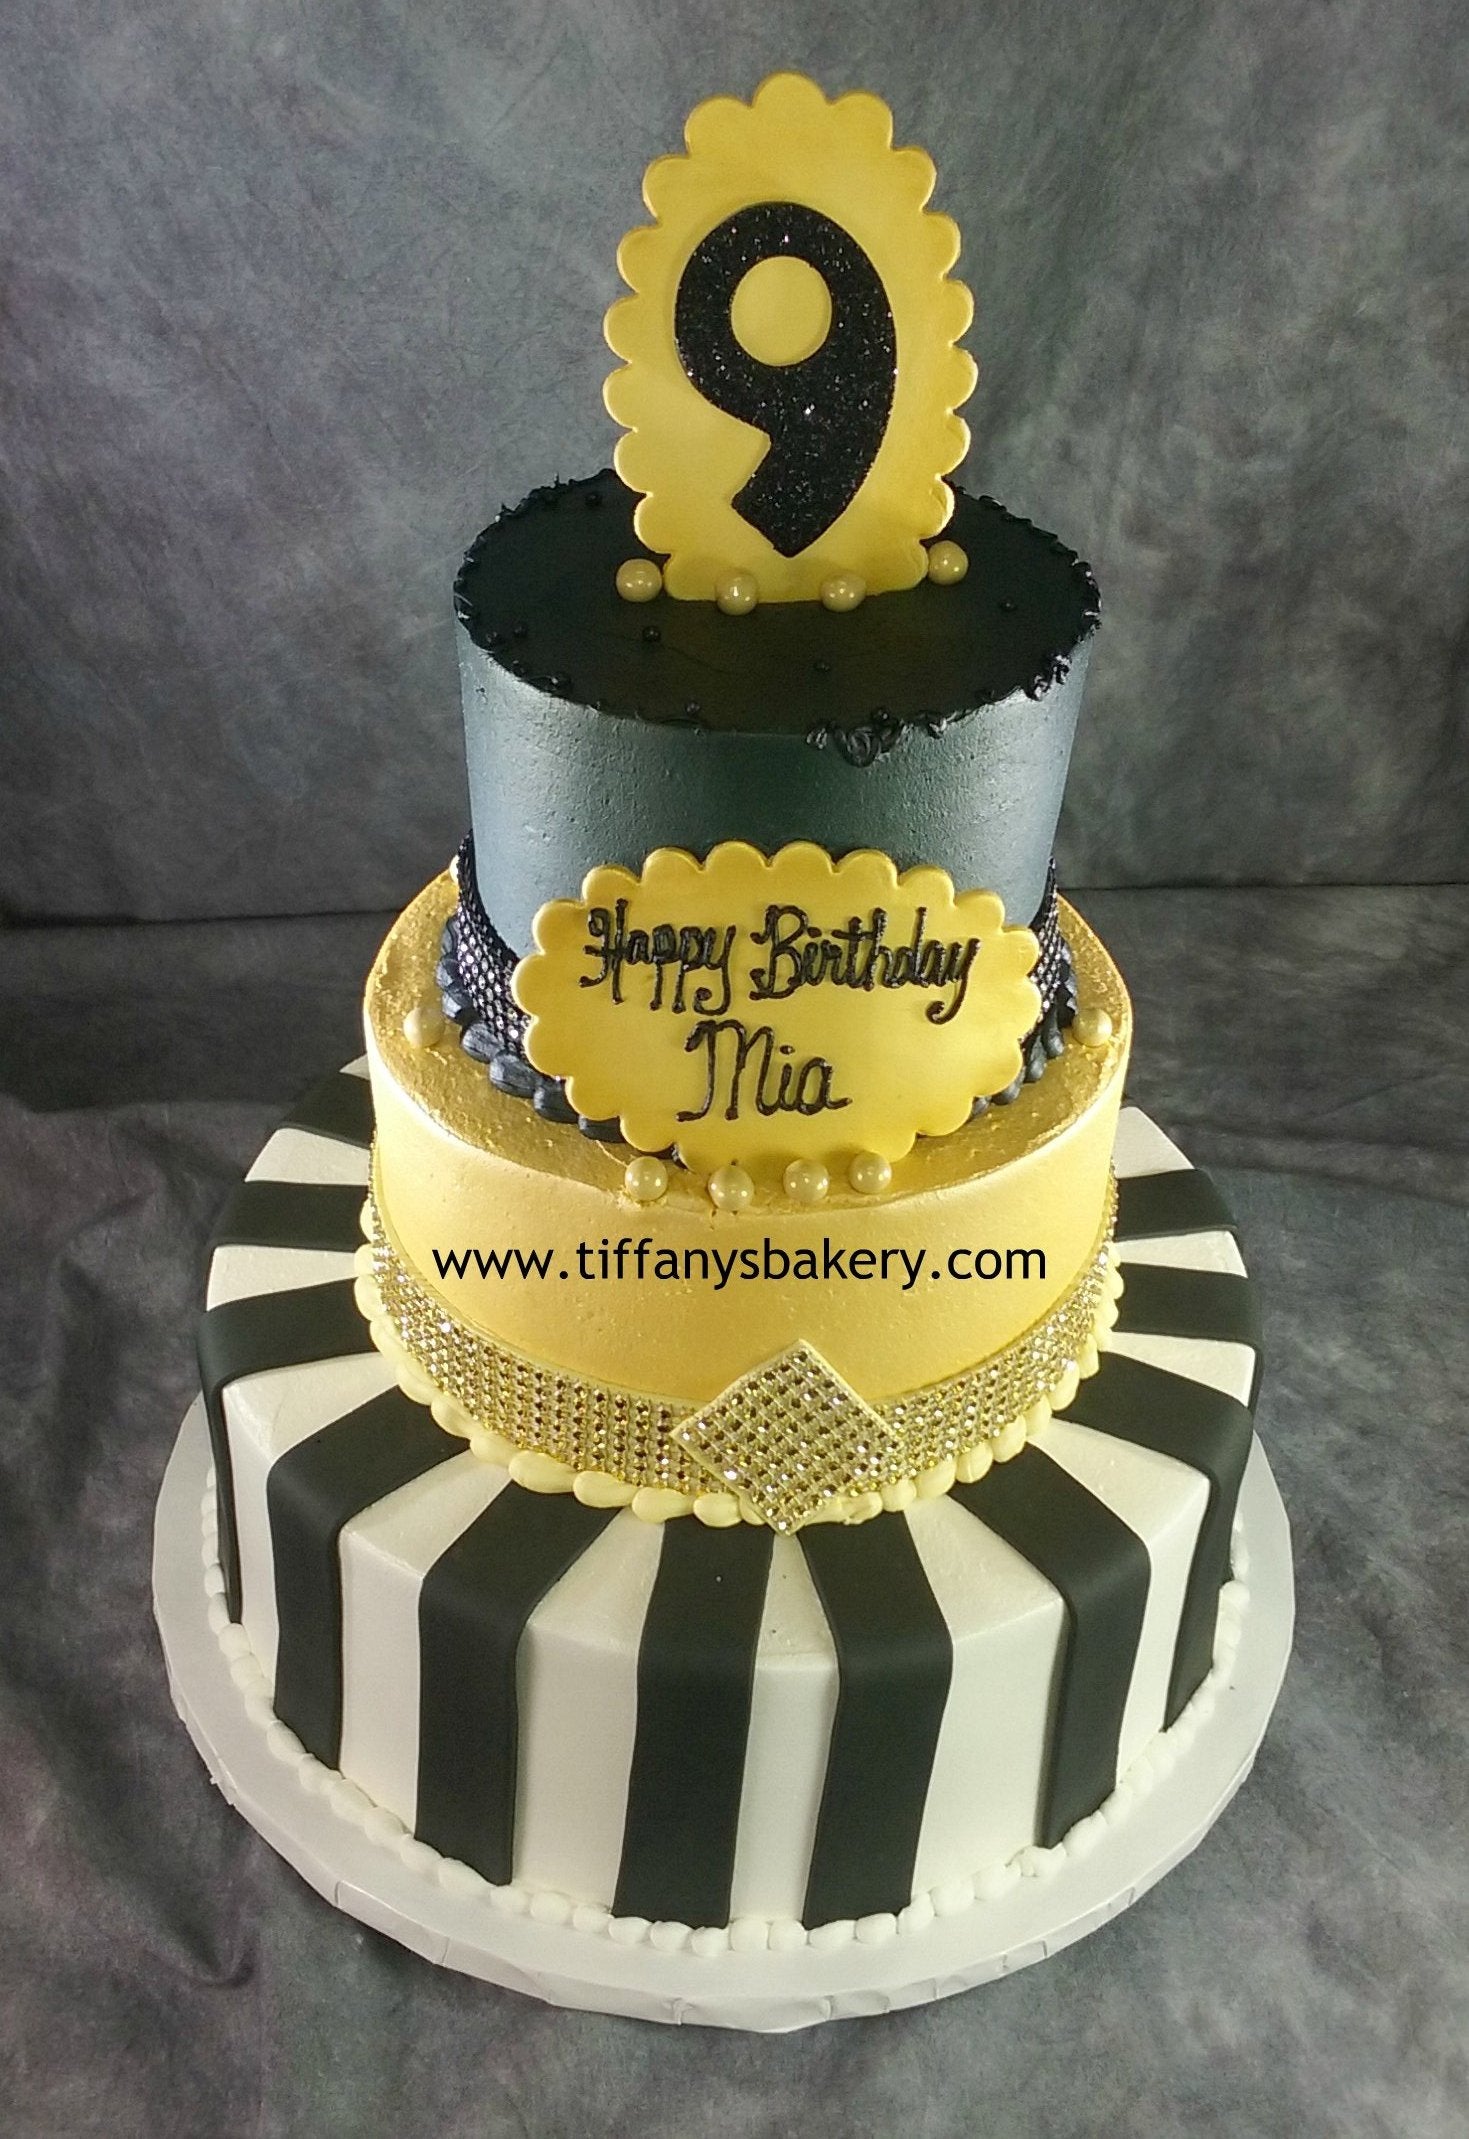 Send 3 Tier Square Cake Online - Indiagift.in